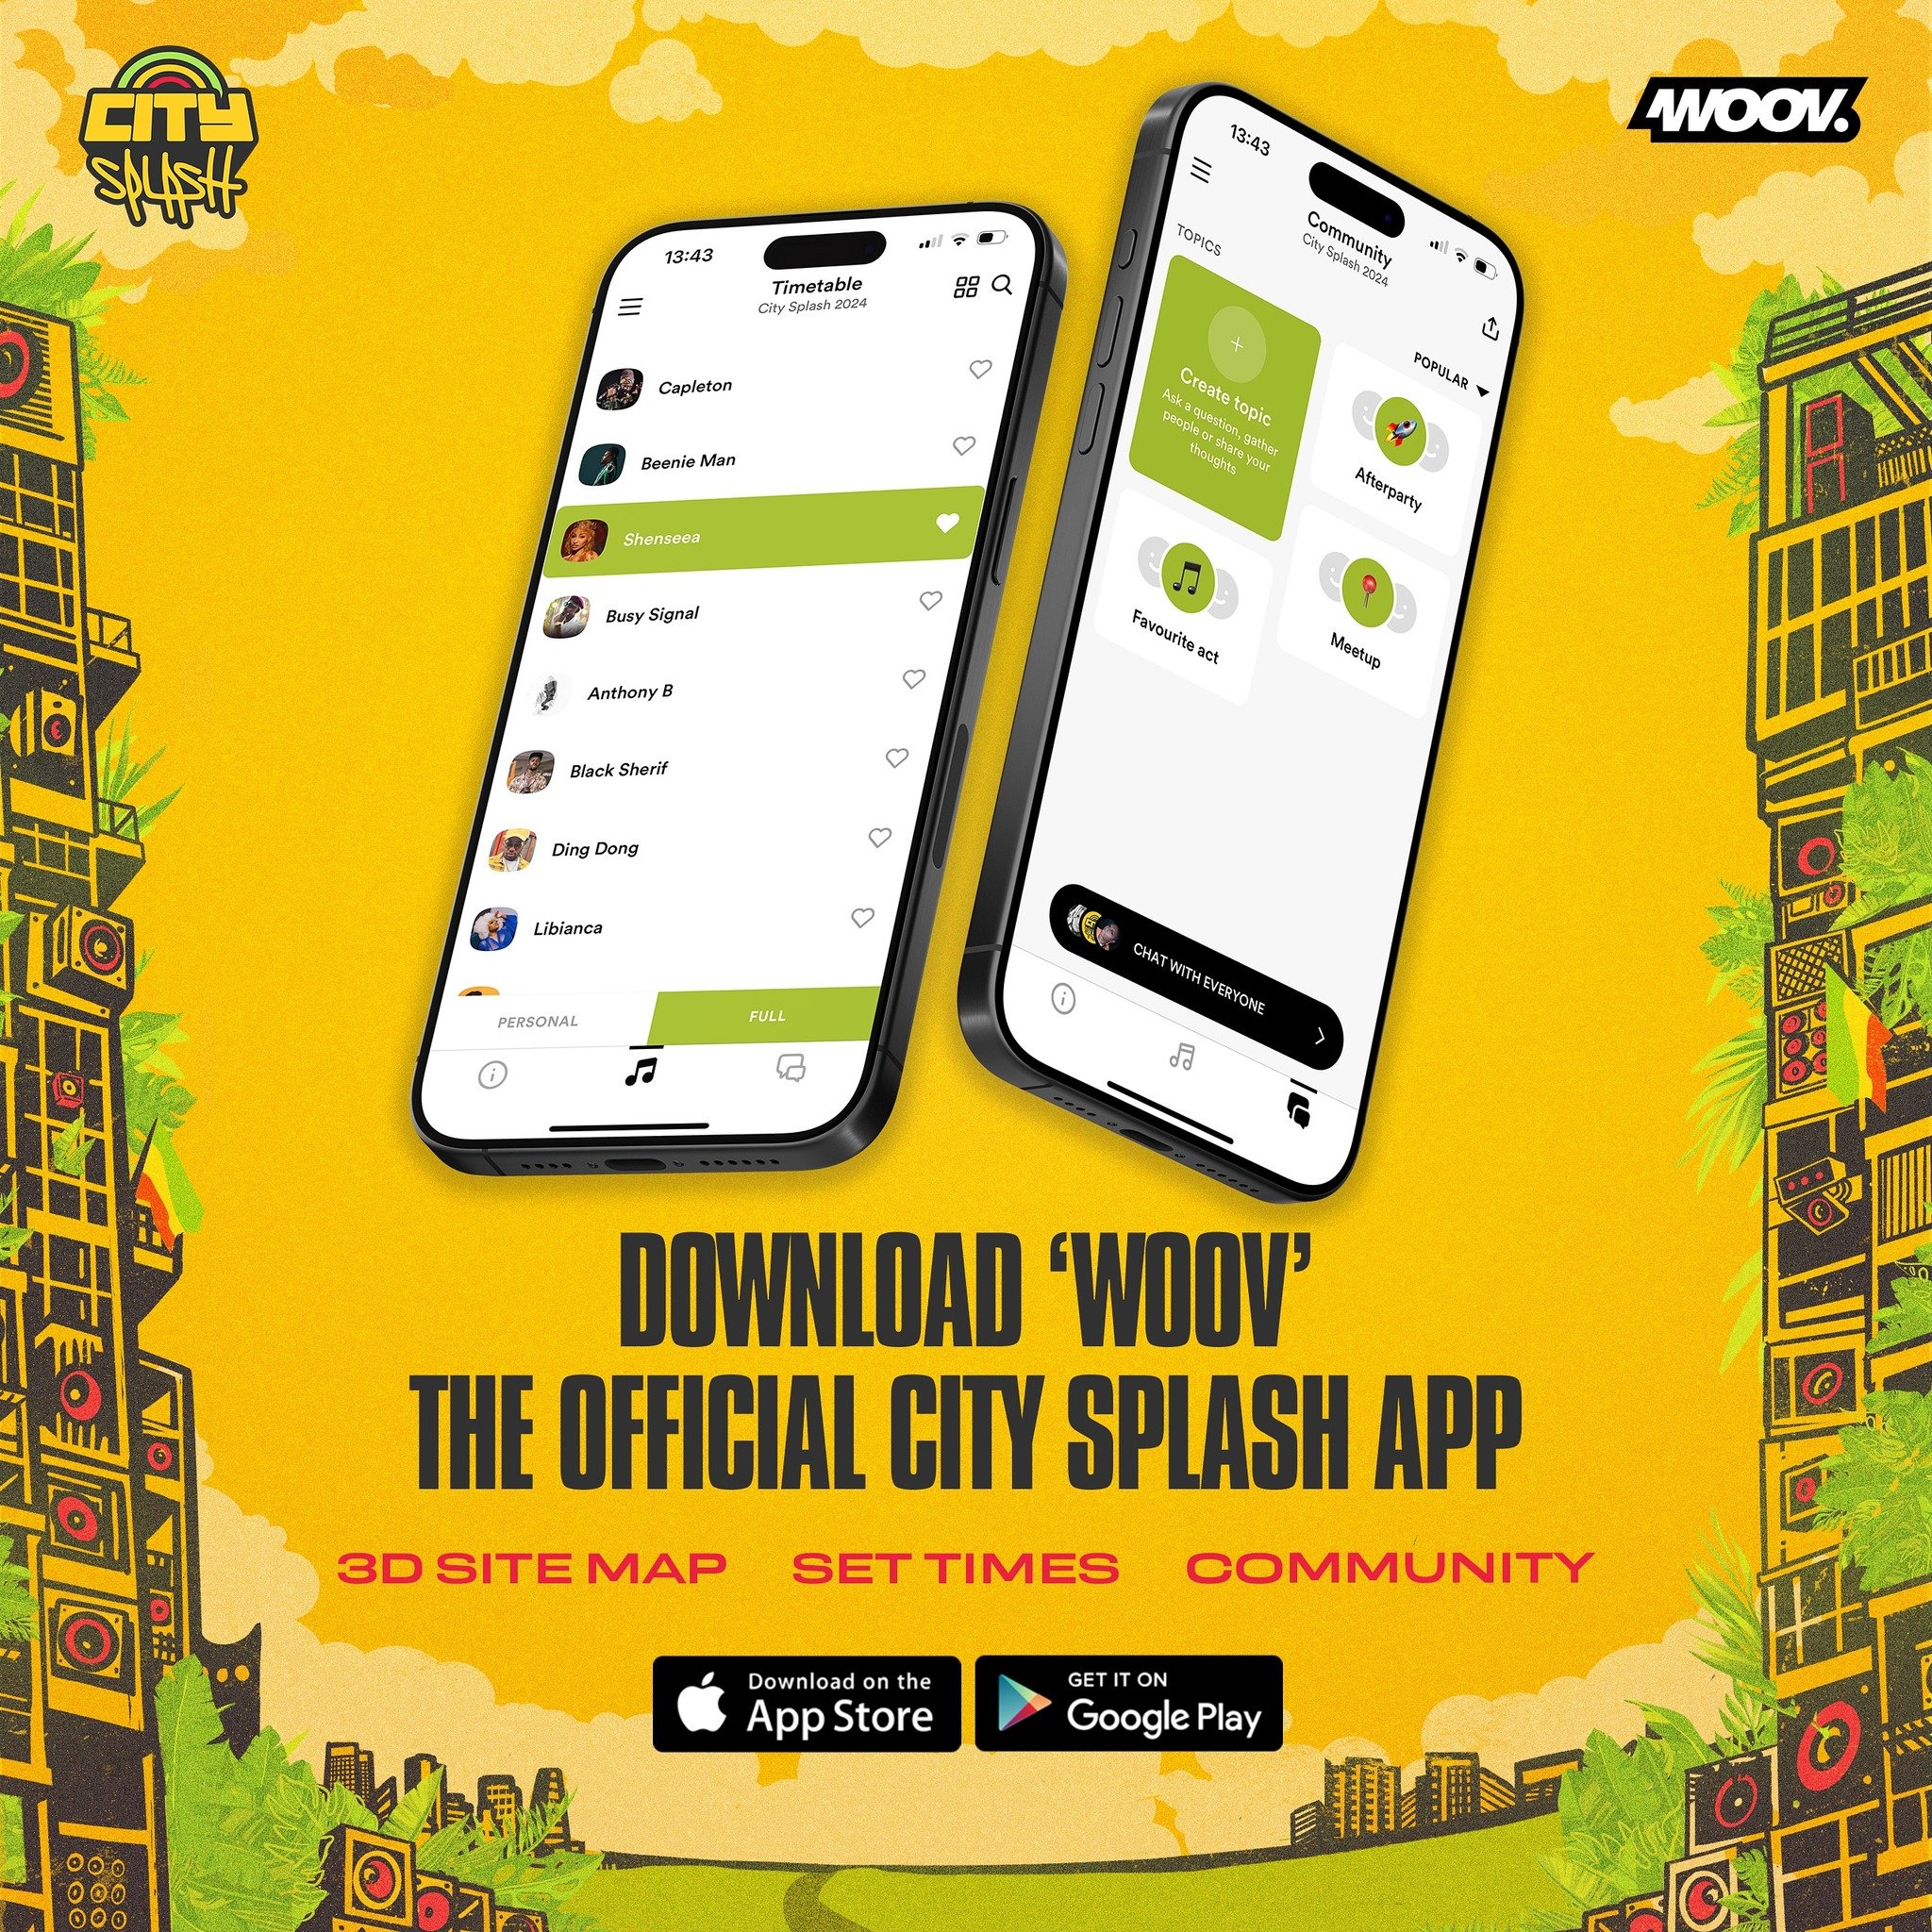 The OFFICIAL CITY SPLASH APP powered by WOOV is here 🌎 

Download from your App Store today to make the most out of the HOTTEST day of the year.

Get access to: 
🔥 Personalised set timetable so you don&rsquo;t miss your favourite artists &amp; DJ&r